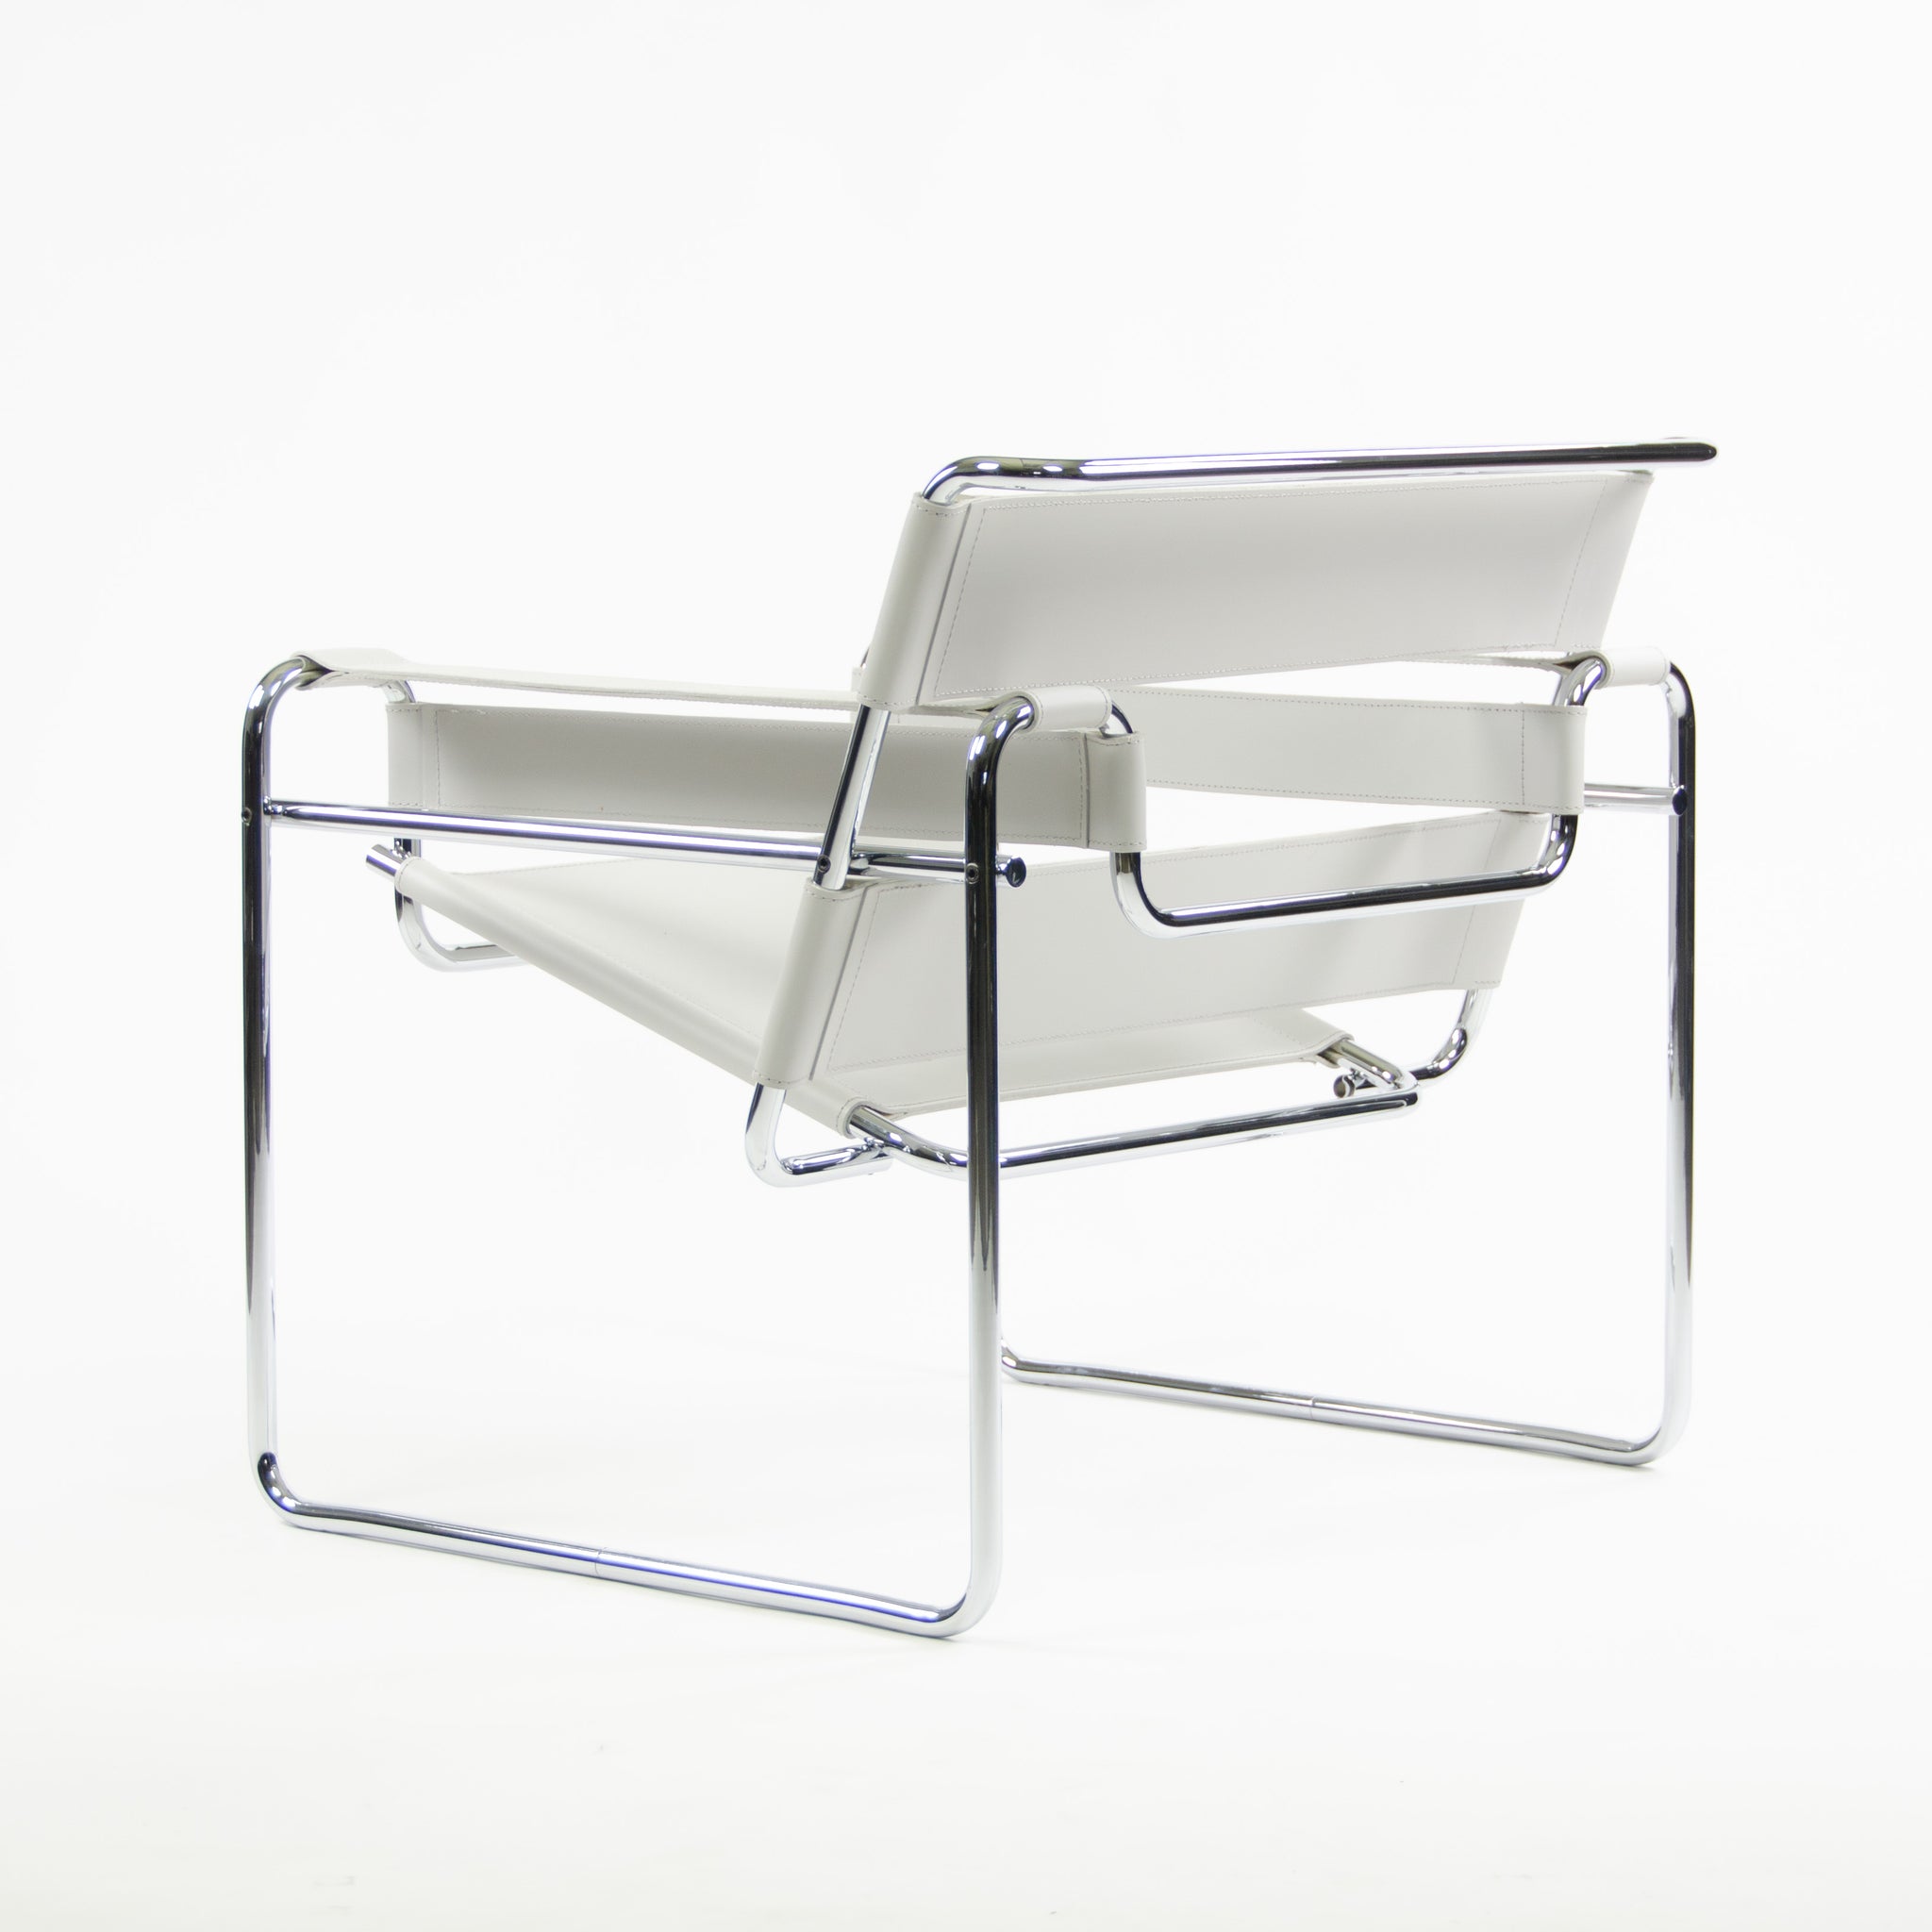 SOLD Brand New In Box Knoll Marcel Breuer Wassily Chair B3 White Leather 2x